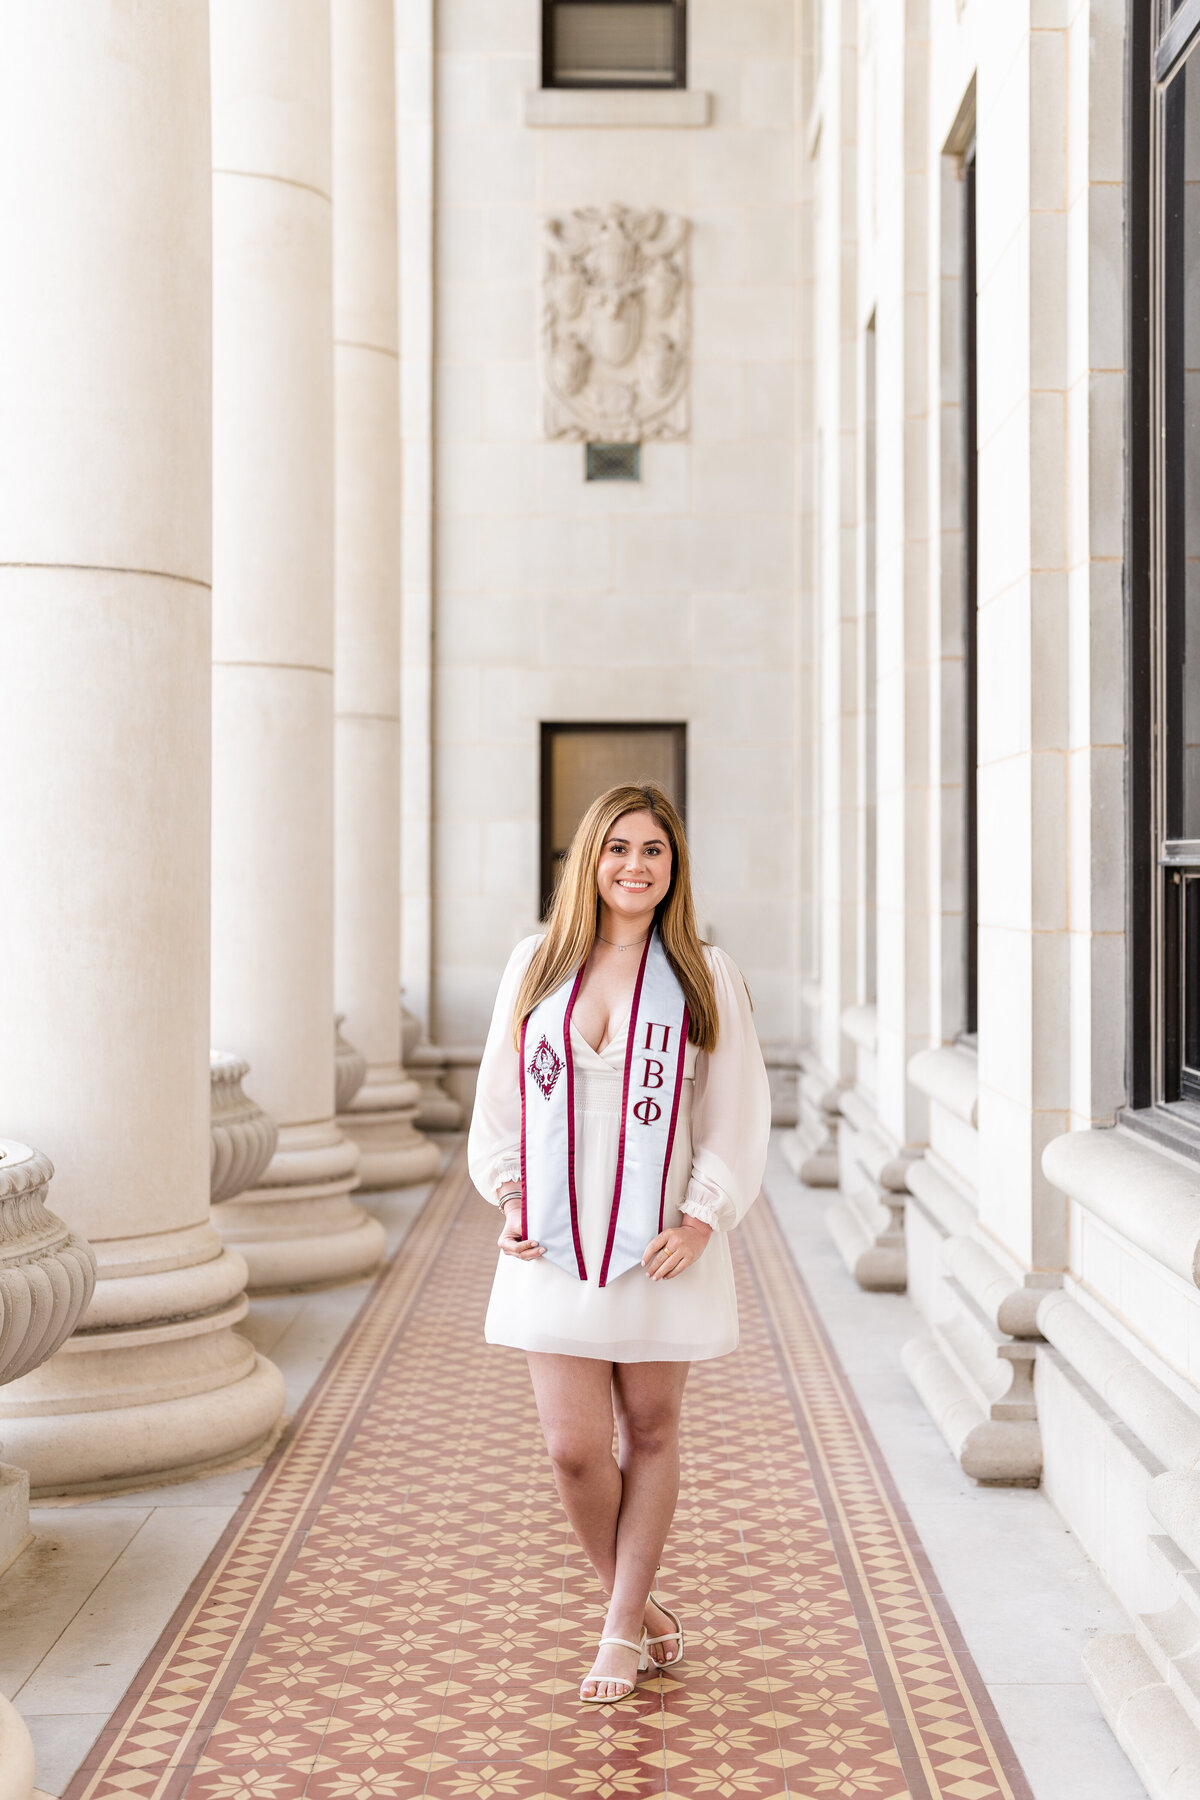 Texas A&M senior girl holding Pi Phi stole while wearing white dress and smiling in the columns of the Administration Building